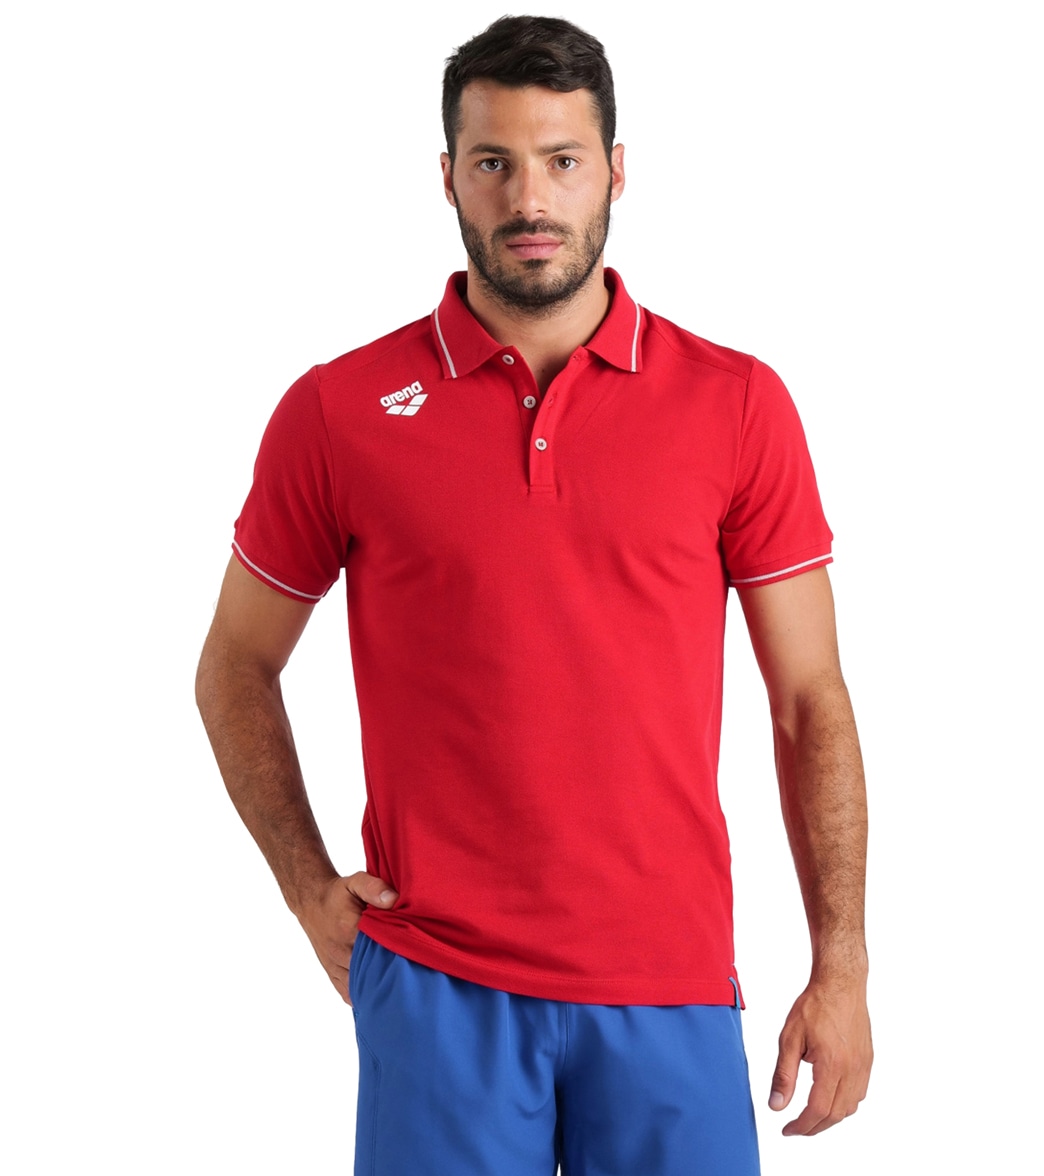 Arena Men's Team Solid Cotton Short Sleeve Polo Shirt - Red 3Xl - Swimoutlet.com